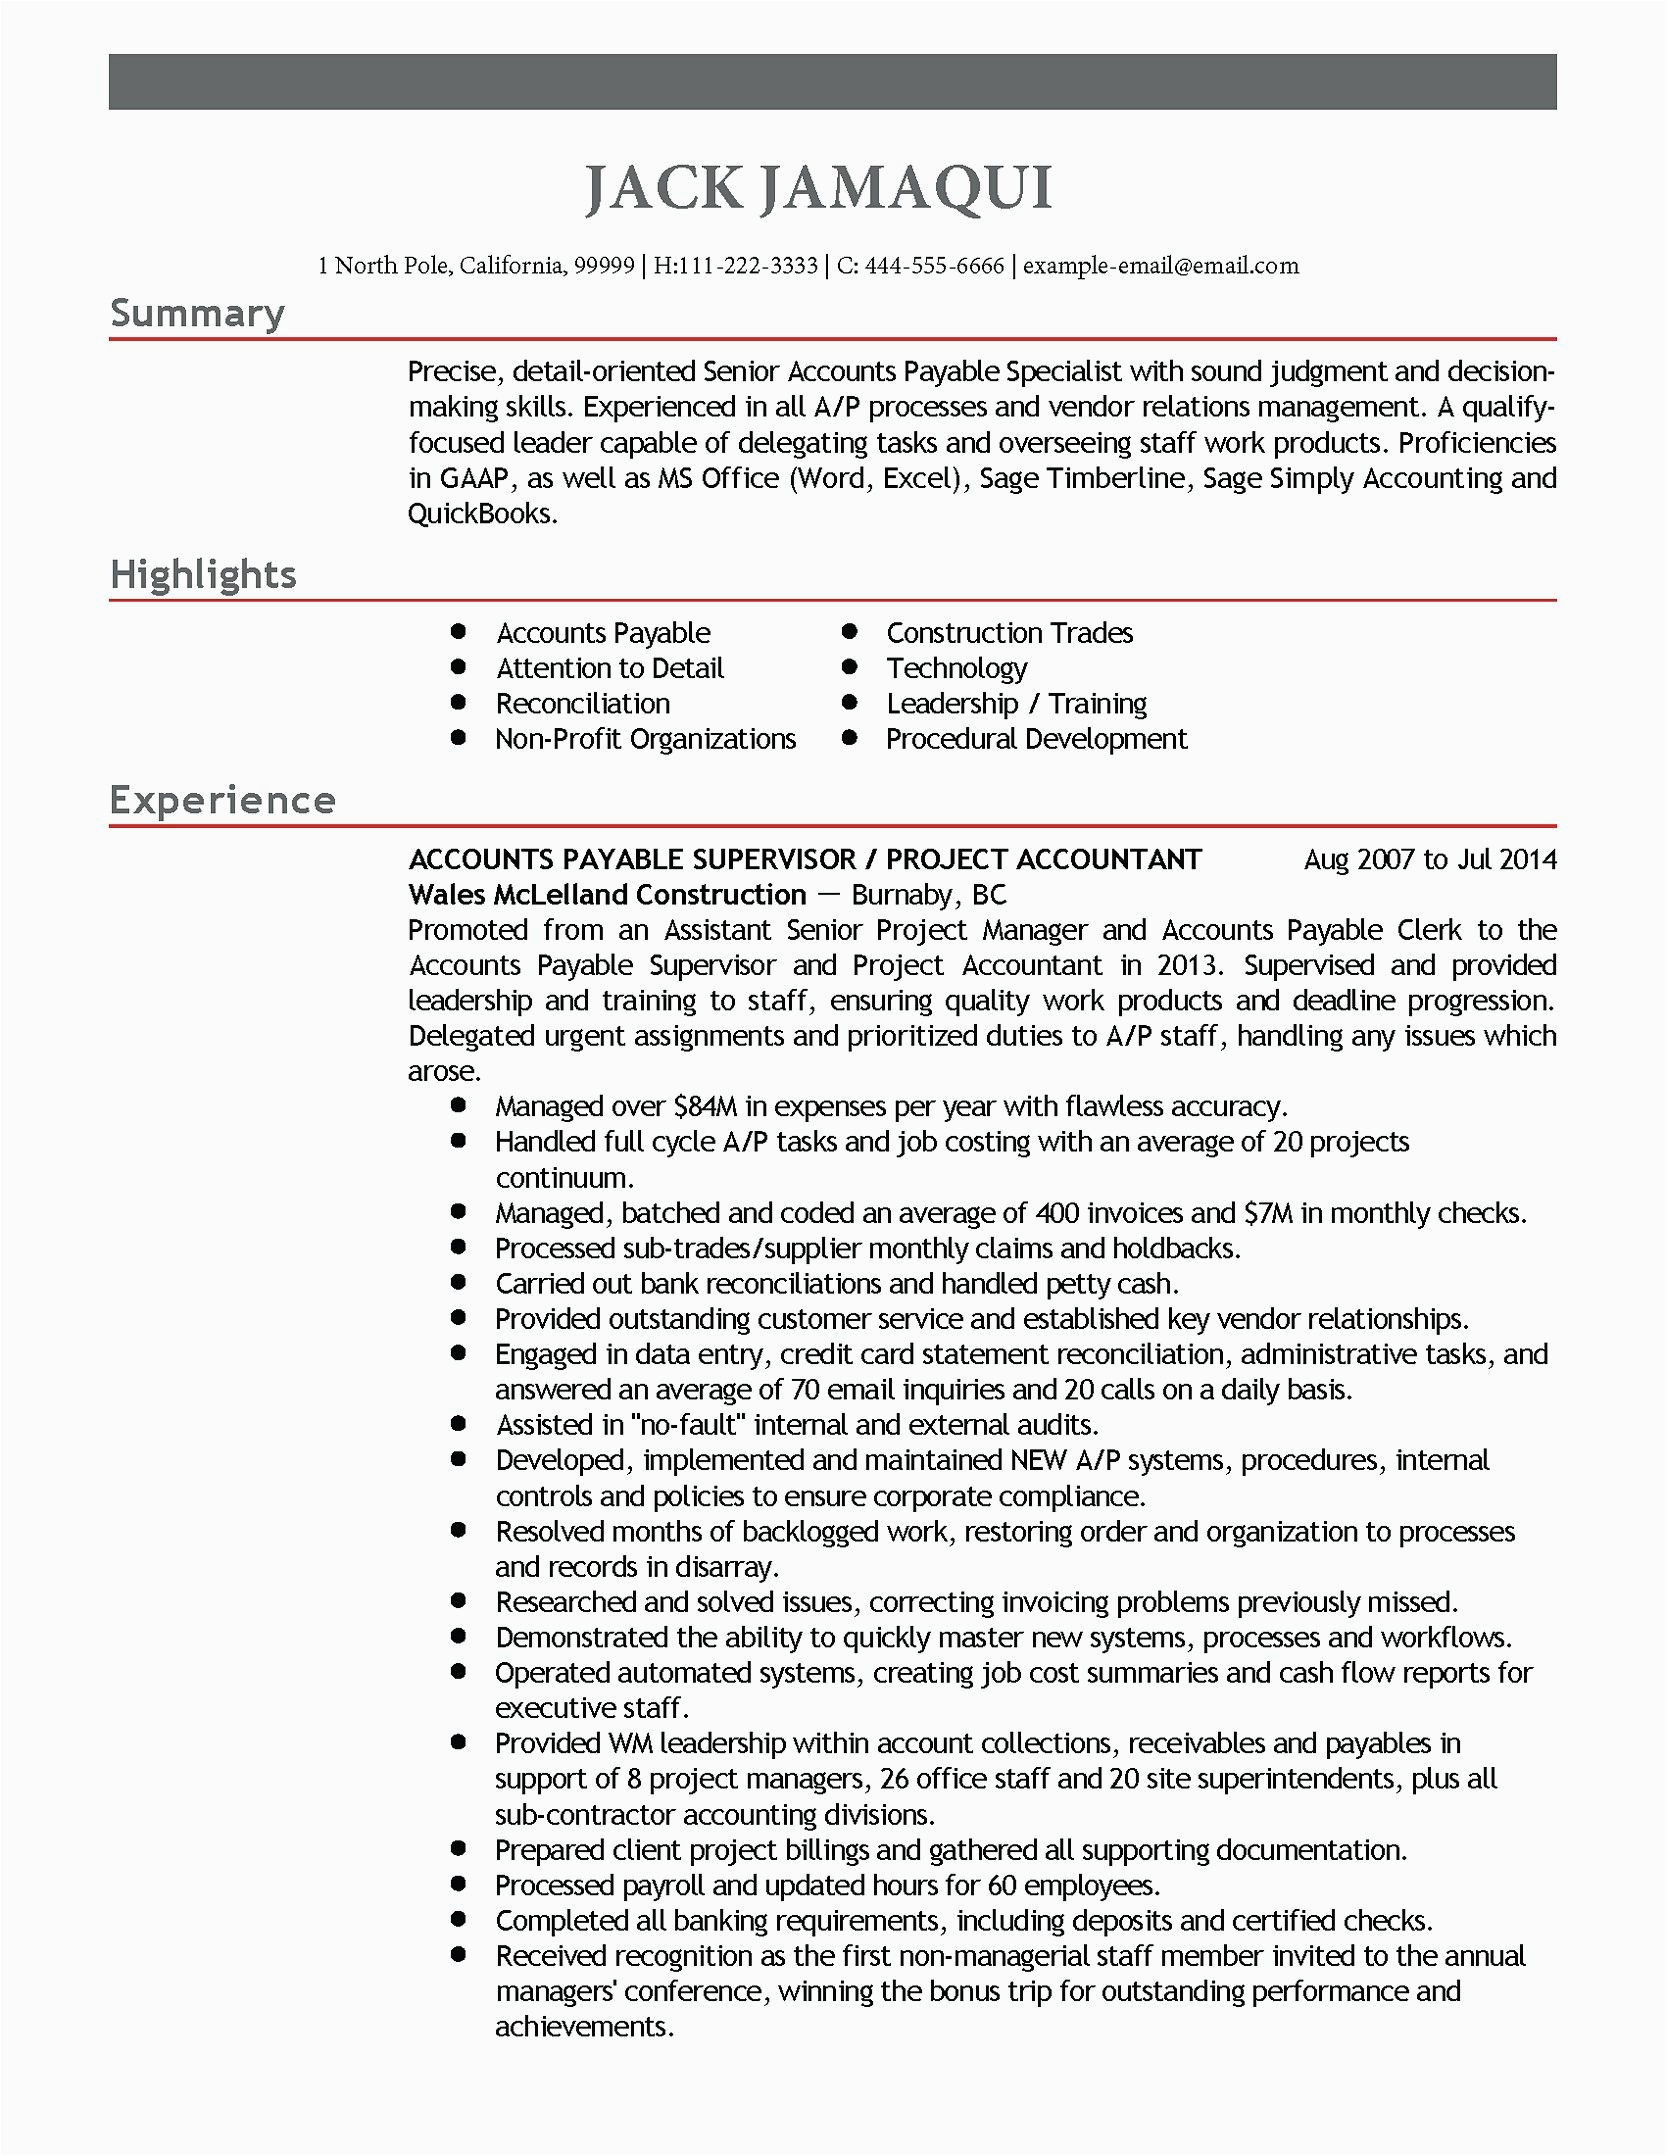 Accounts Payable Sample Resume In New York Accounts Payable Manager Resume Accounts Payable Manager Resume are